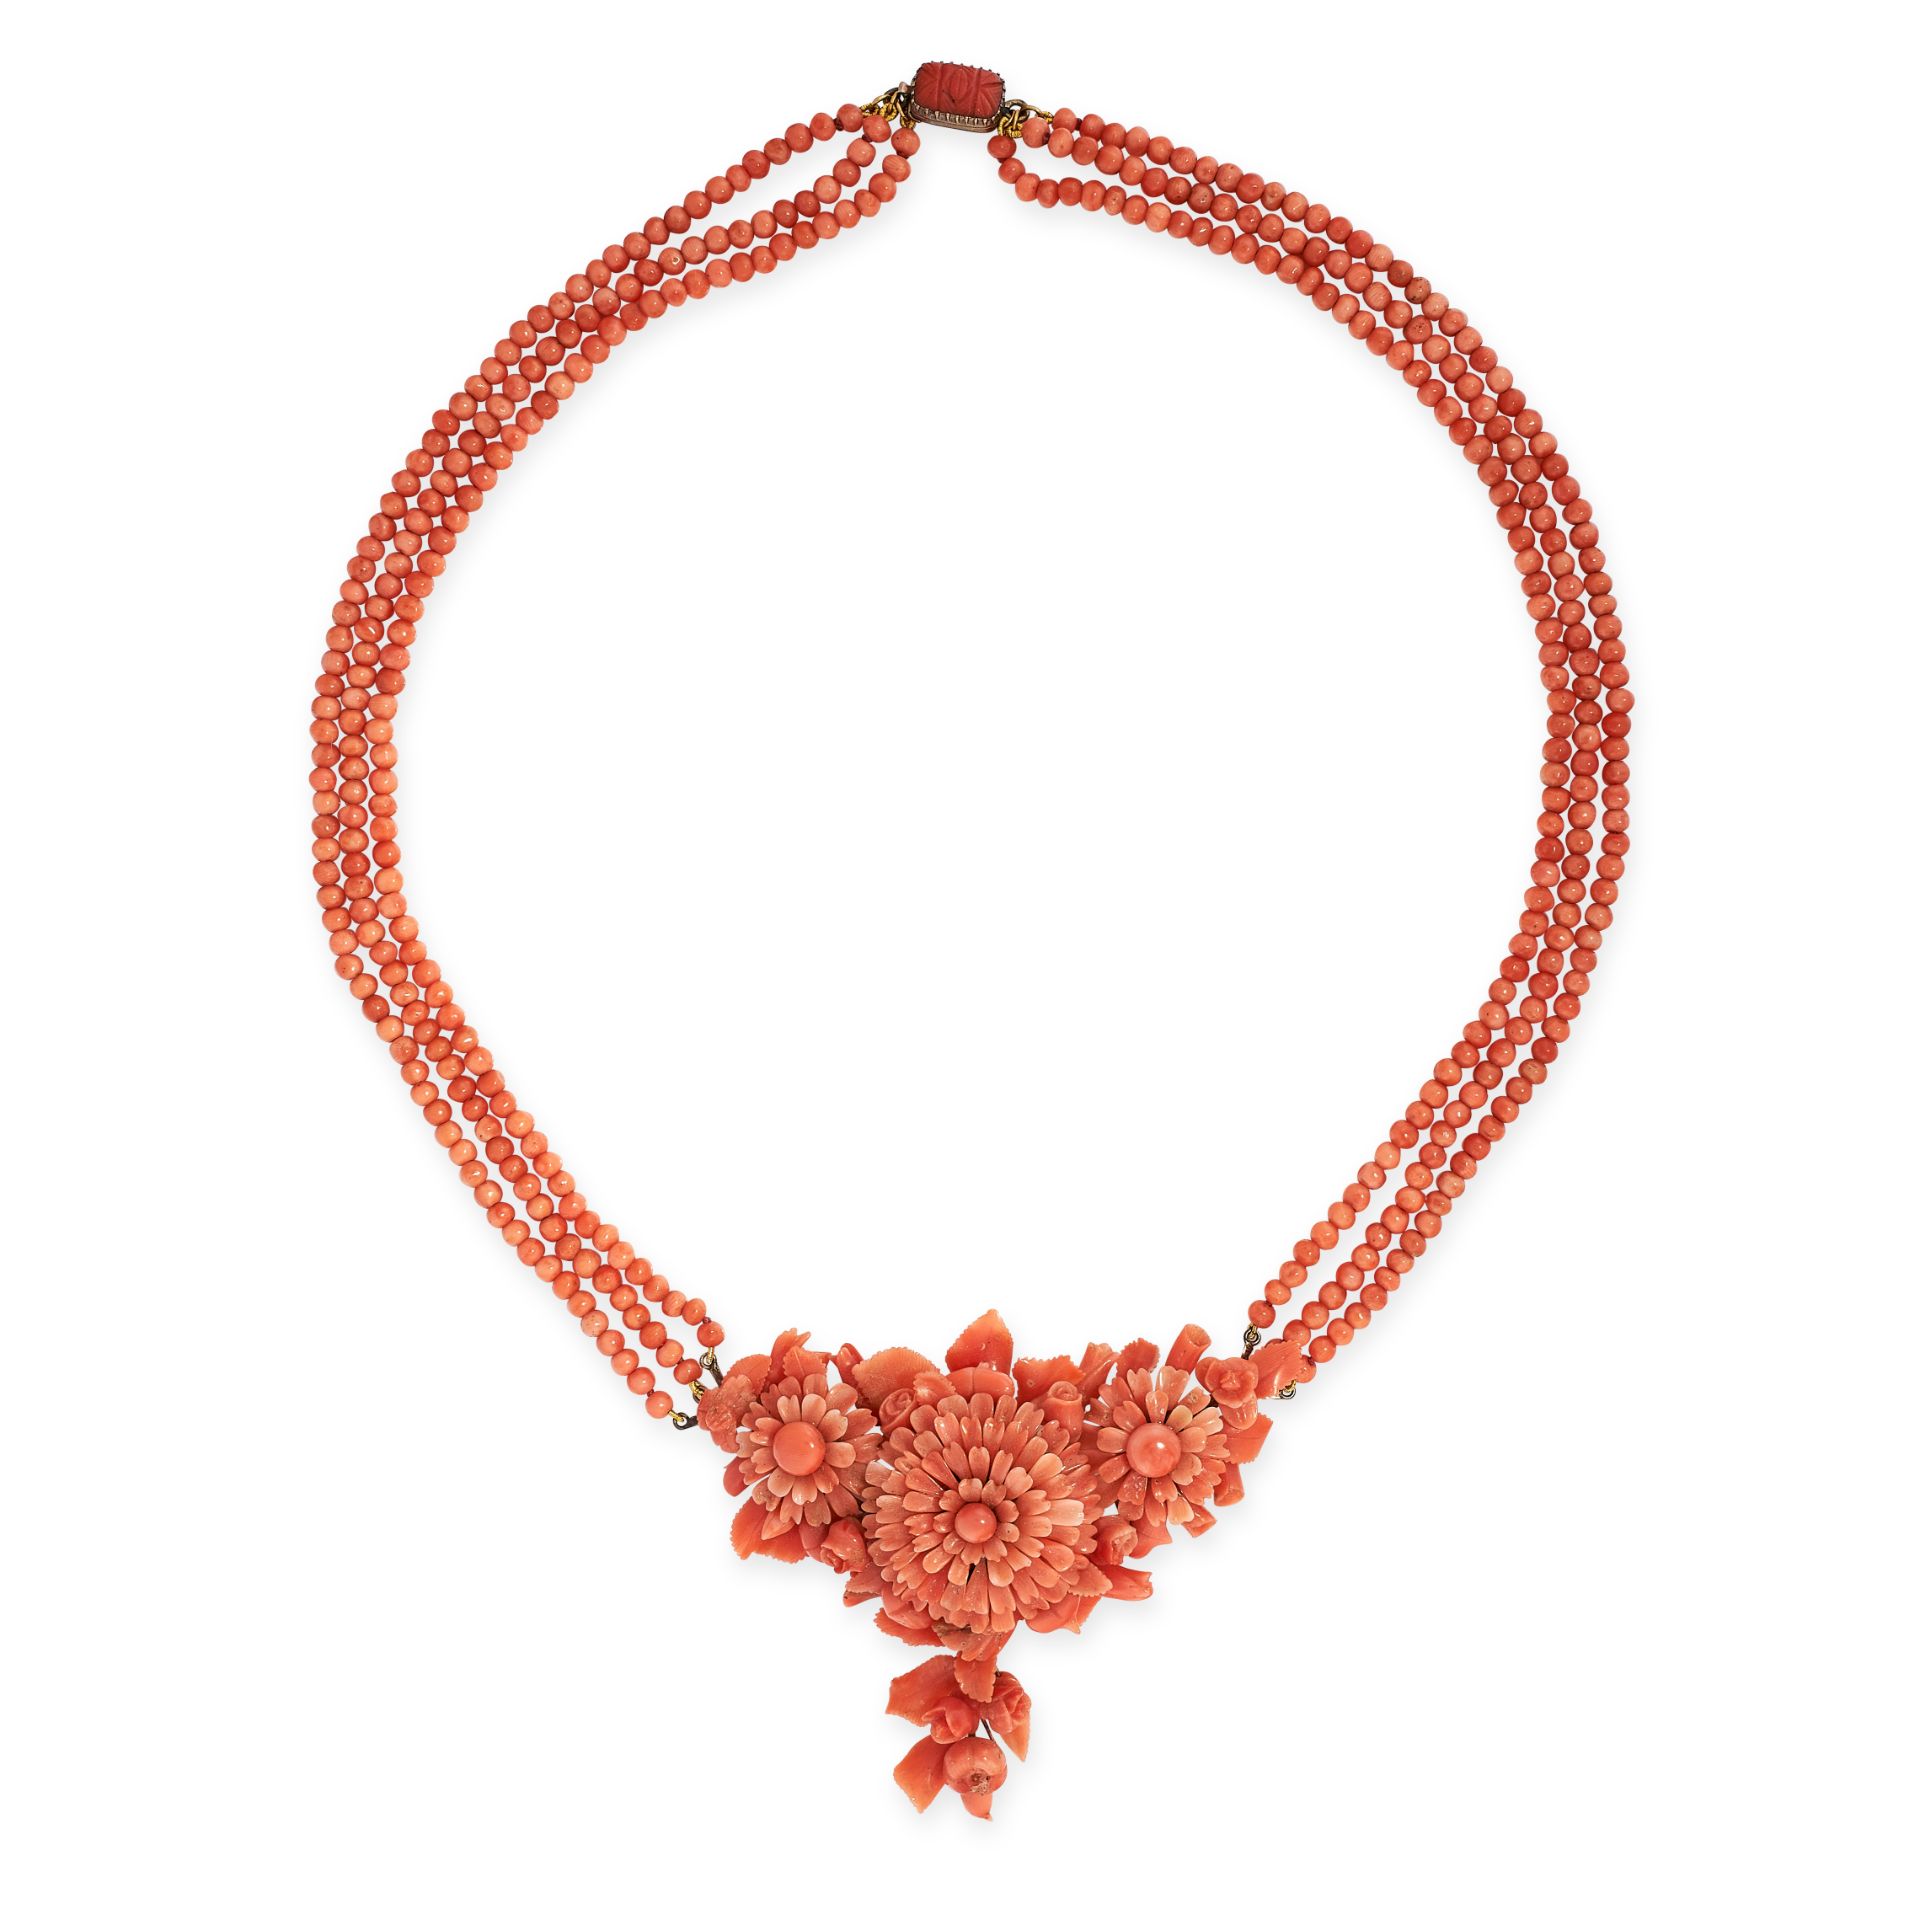 AN ANTIQUE CORAL NECKLACE comprising three rows of polished coral beads centring a foliate pendant